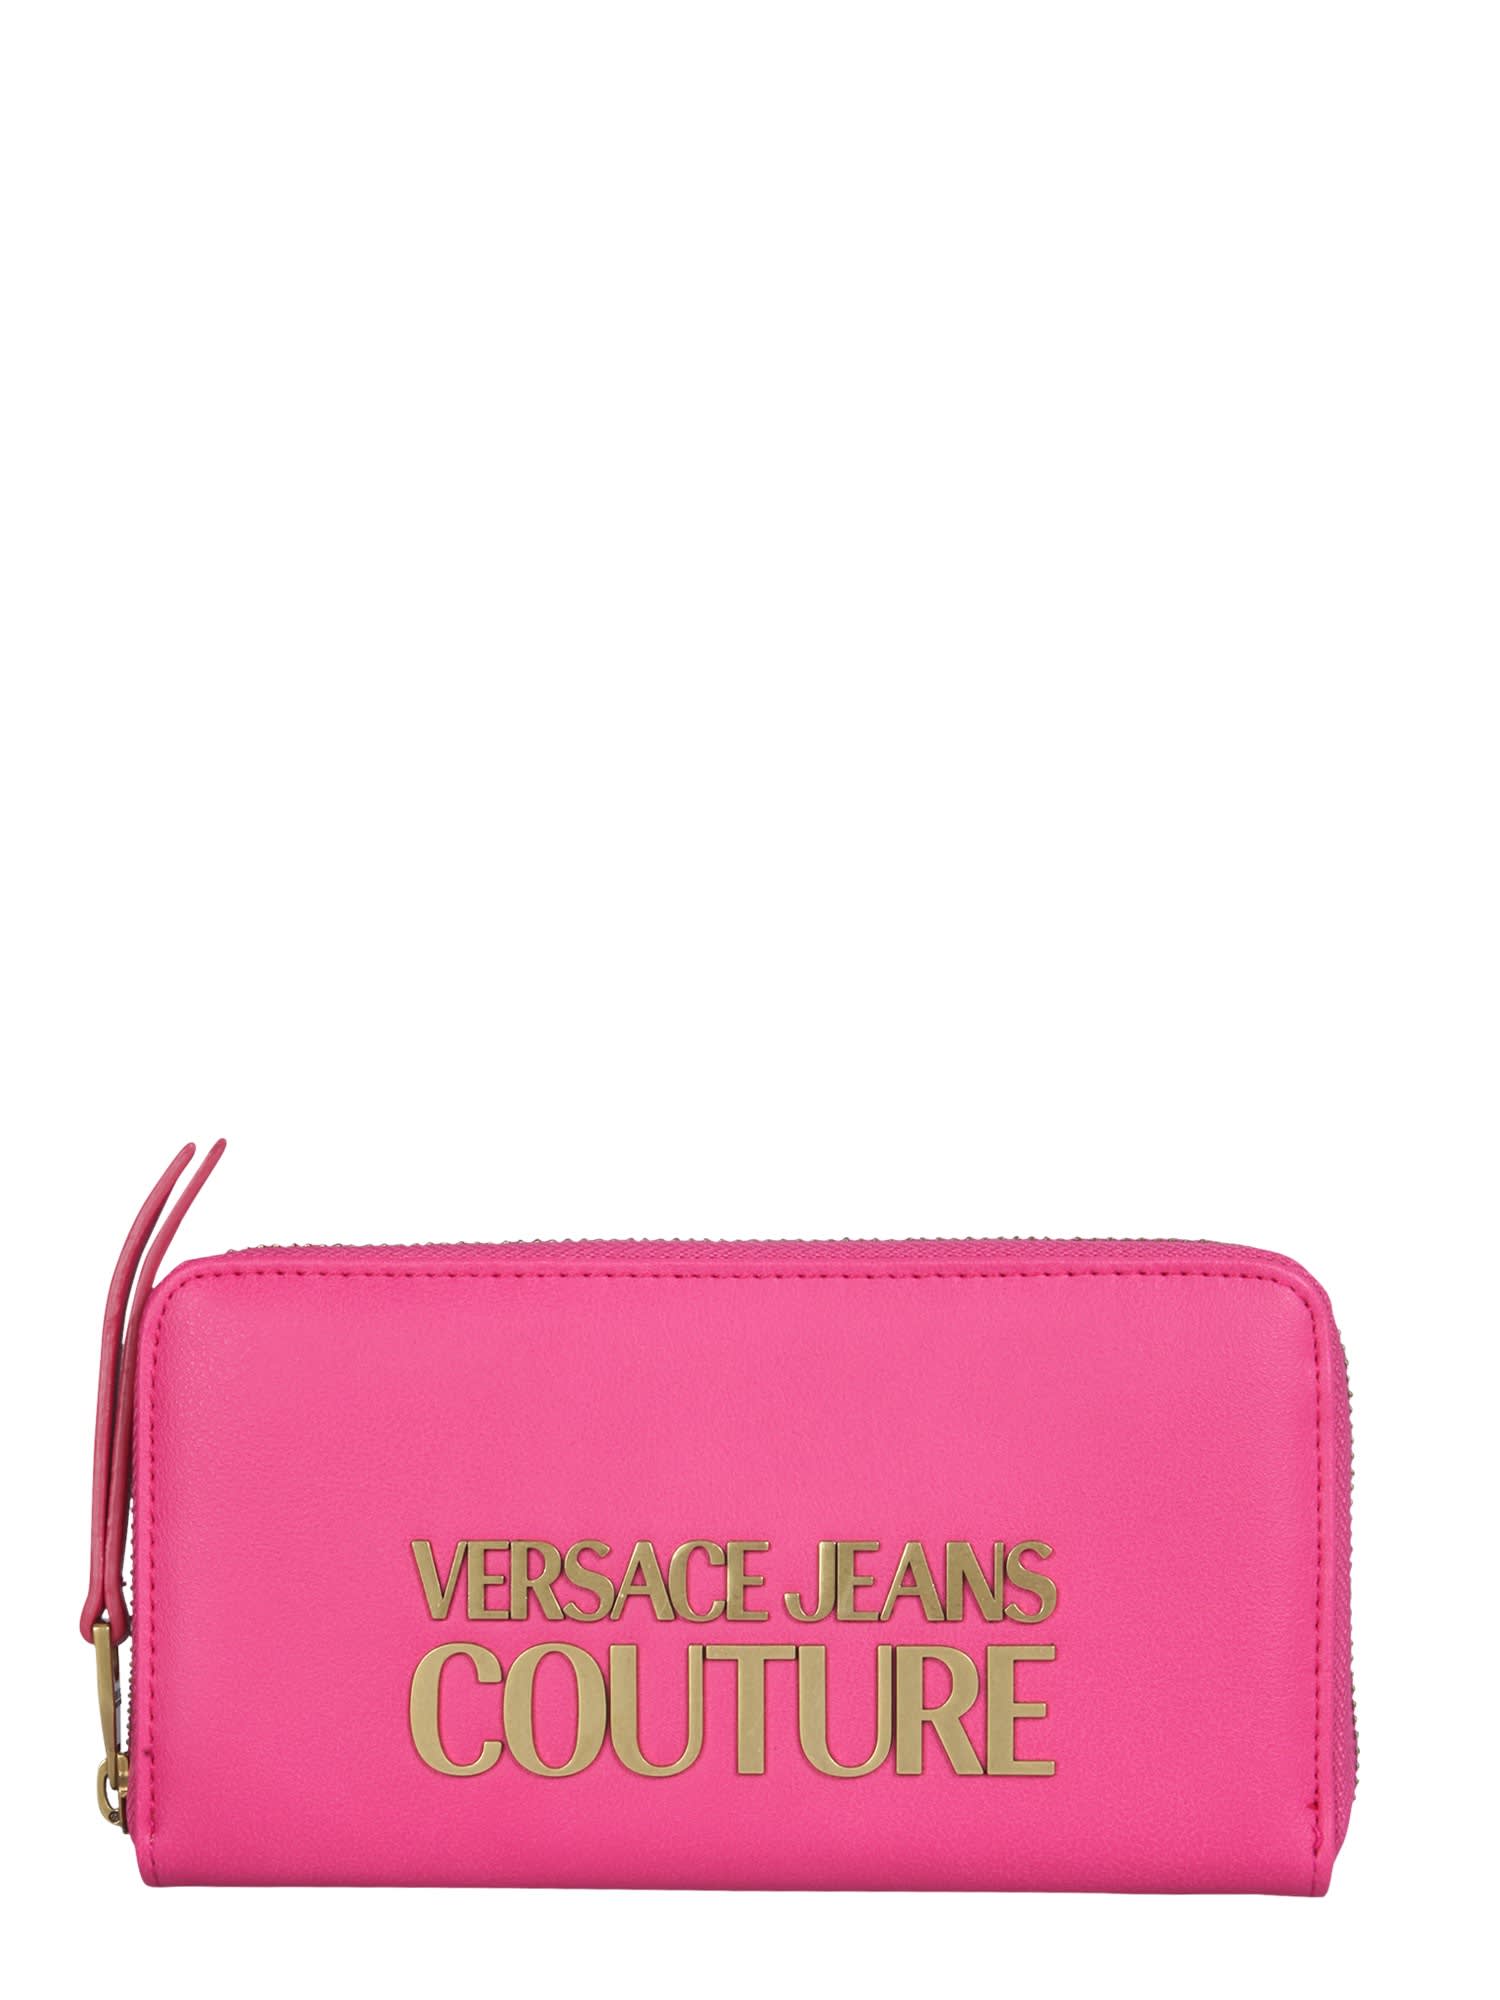 Versace Jeans Couture Eco Leather Wallet